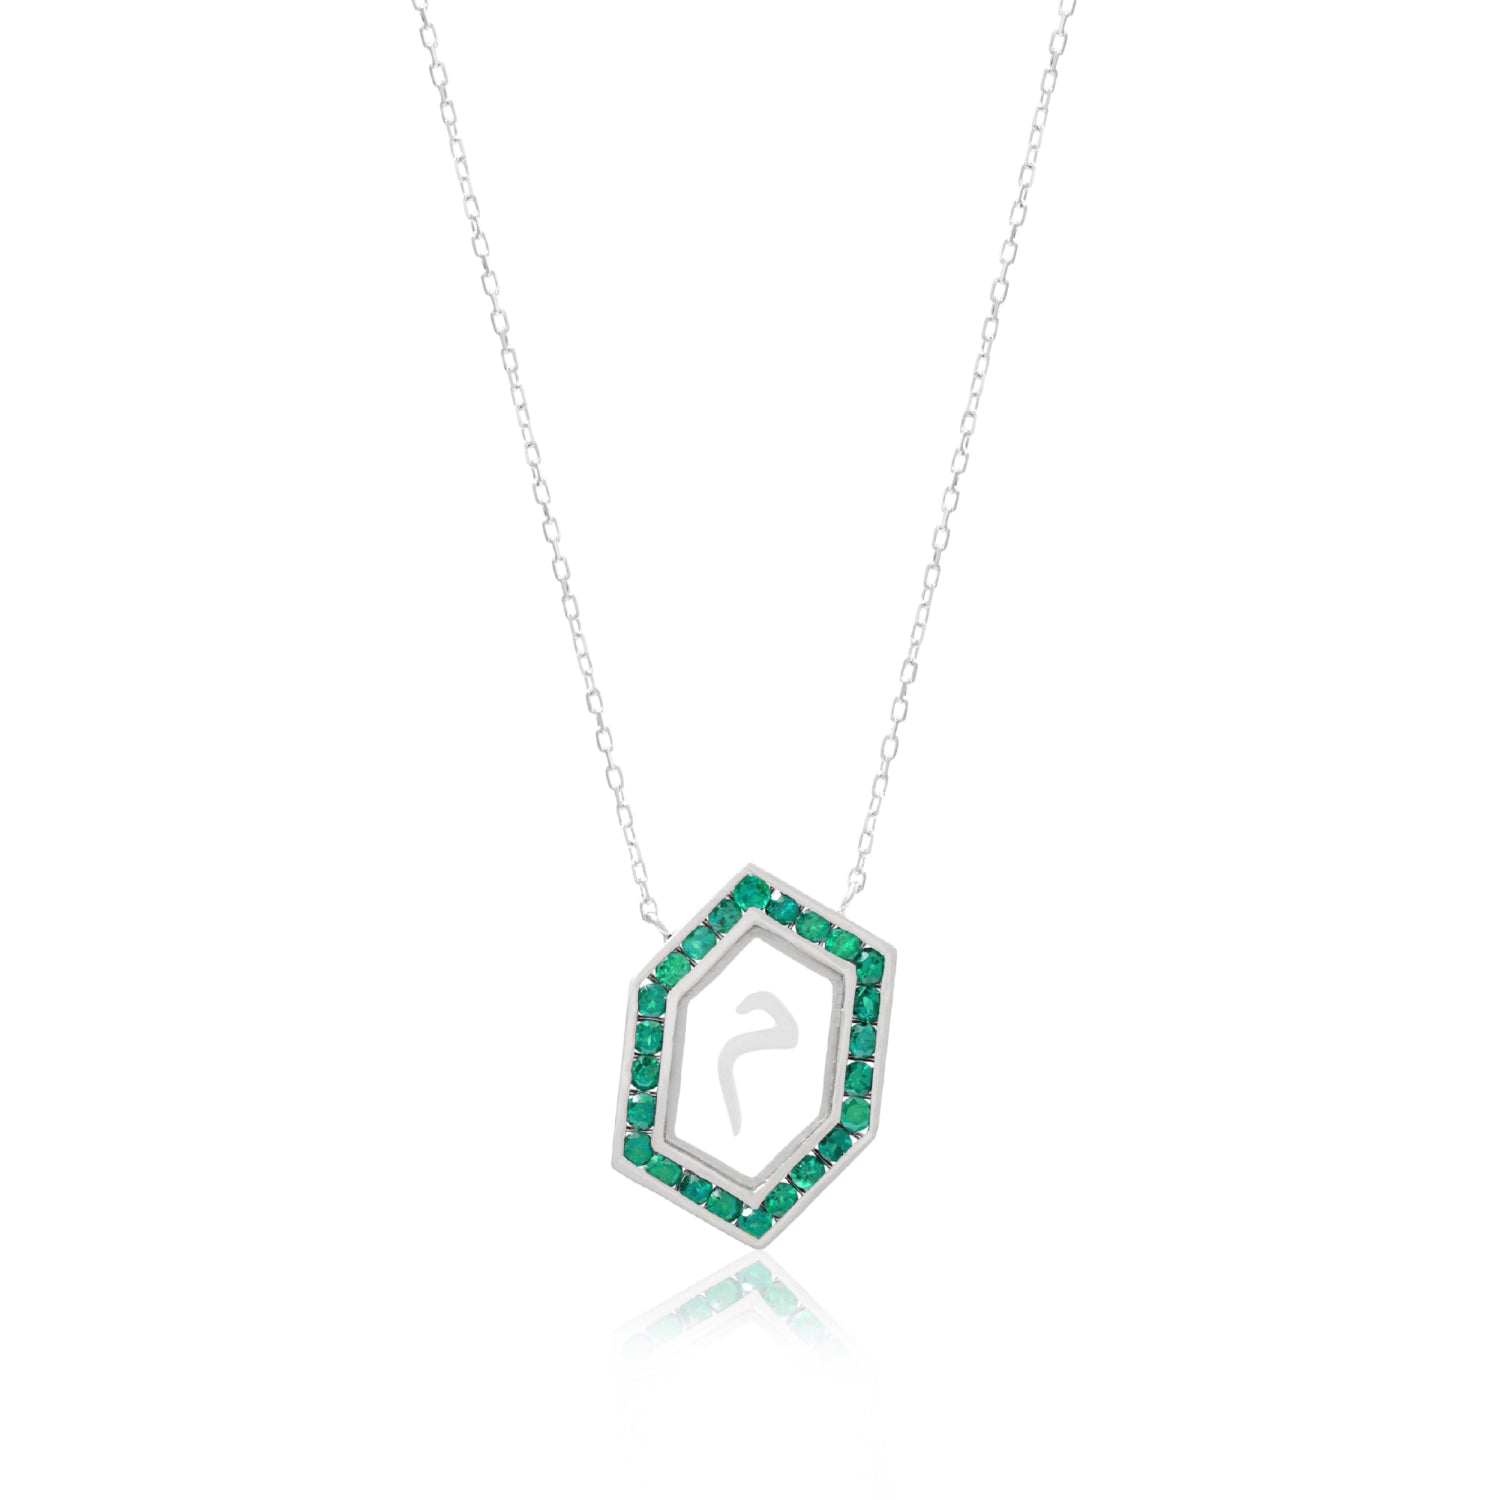 Qamoos 1.0 Letter م Emerald Necklace in White Gold